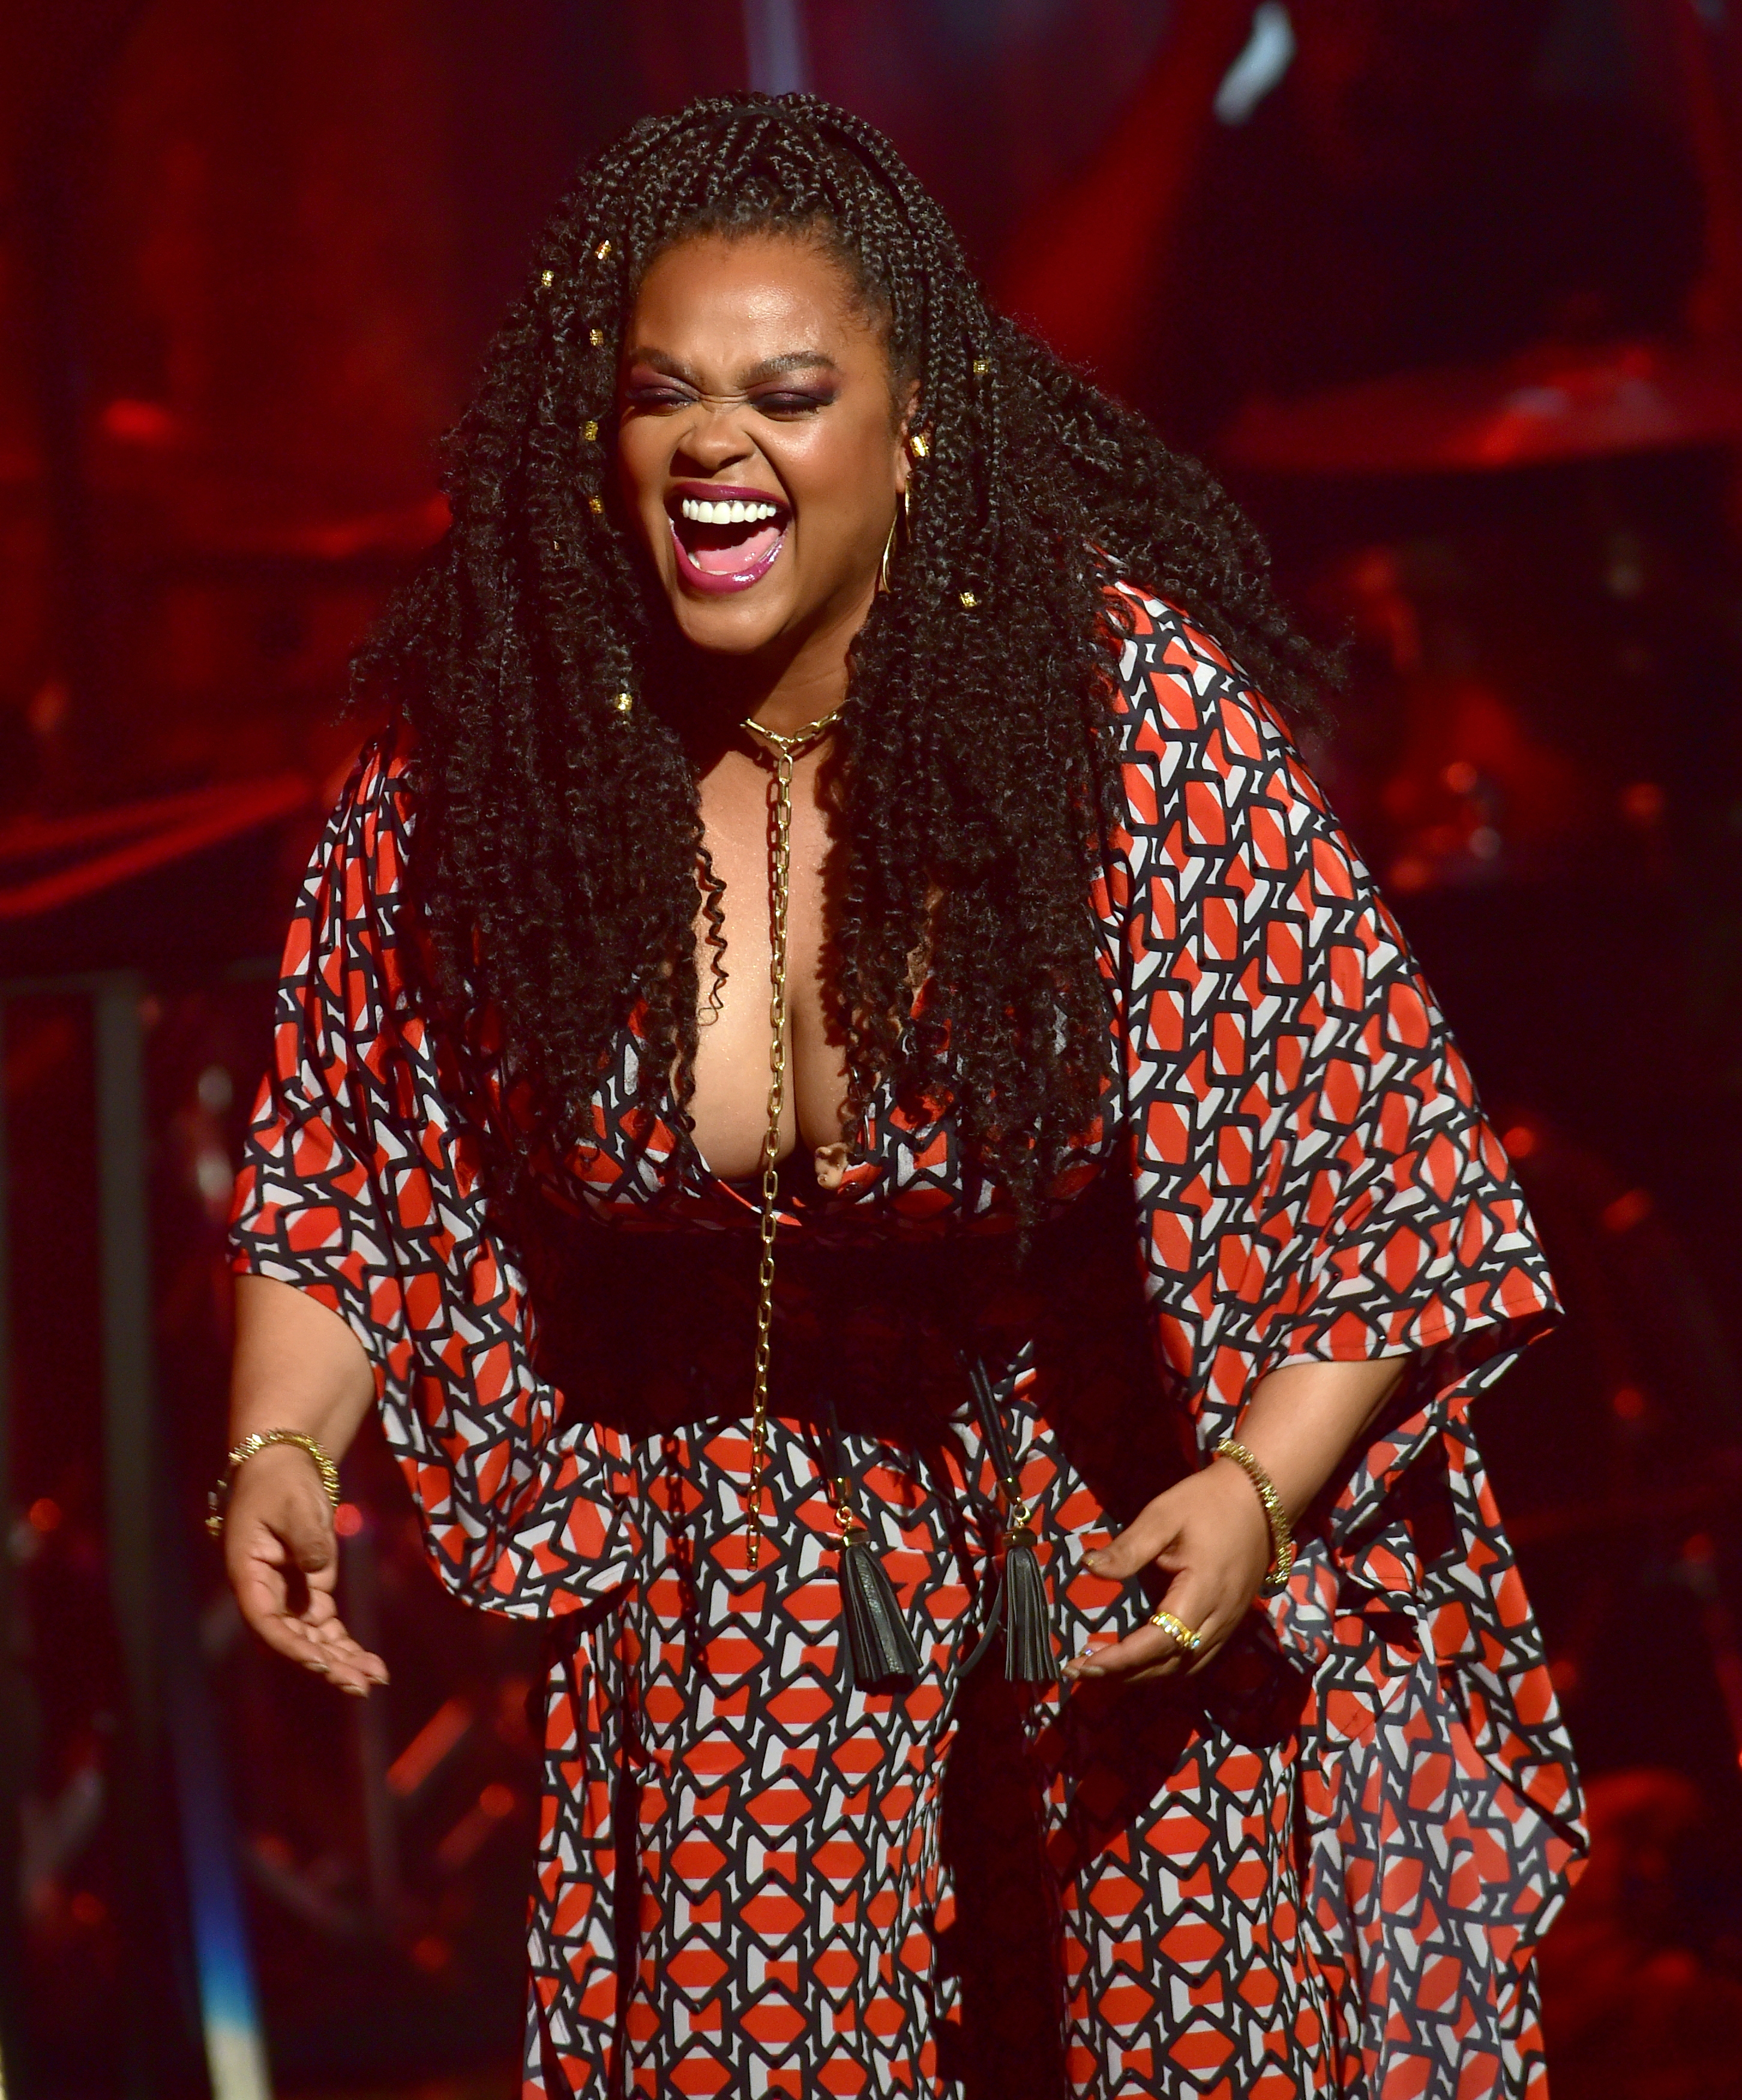 Jill Scott performs at the Fox Theater on August 12, 2019, in Atlanta, Georgia. | Source: Getty Images